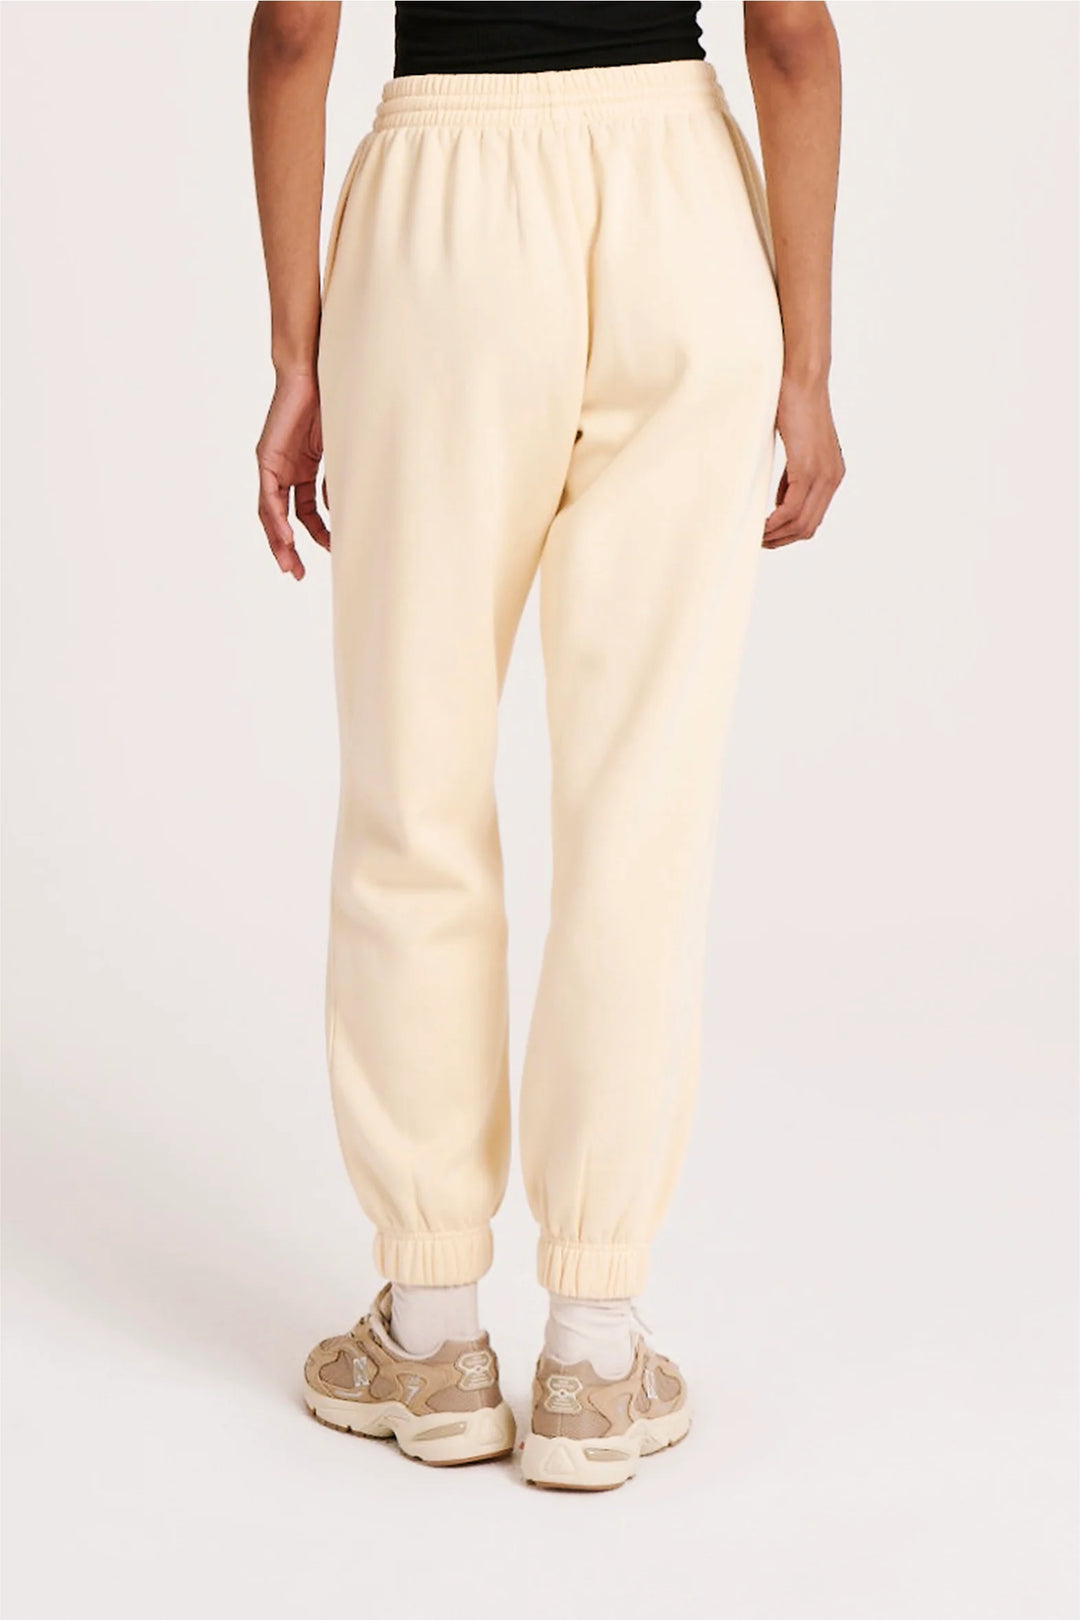 Nude Lucy Carter Curated Trackpant- Custard